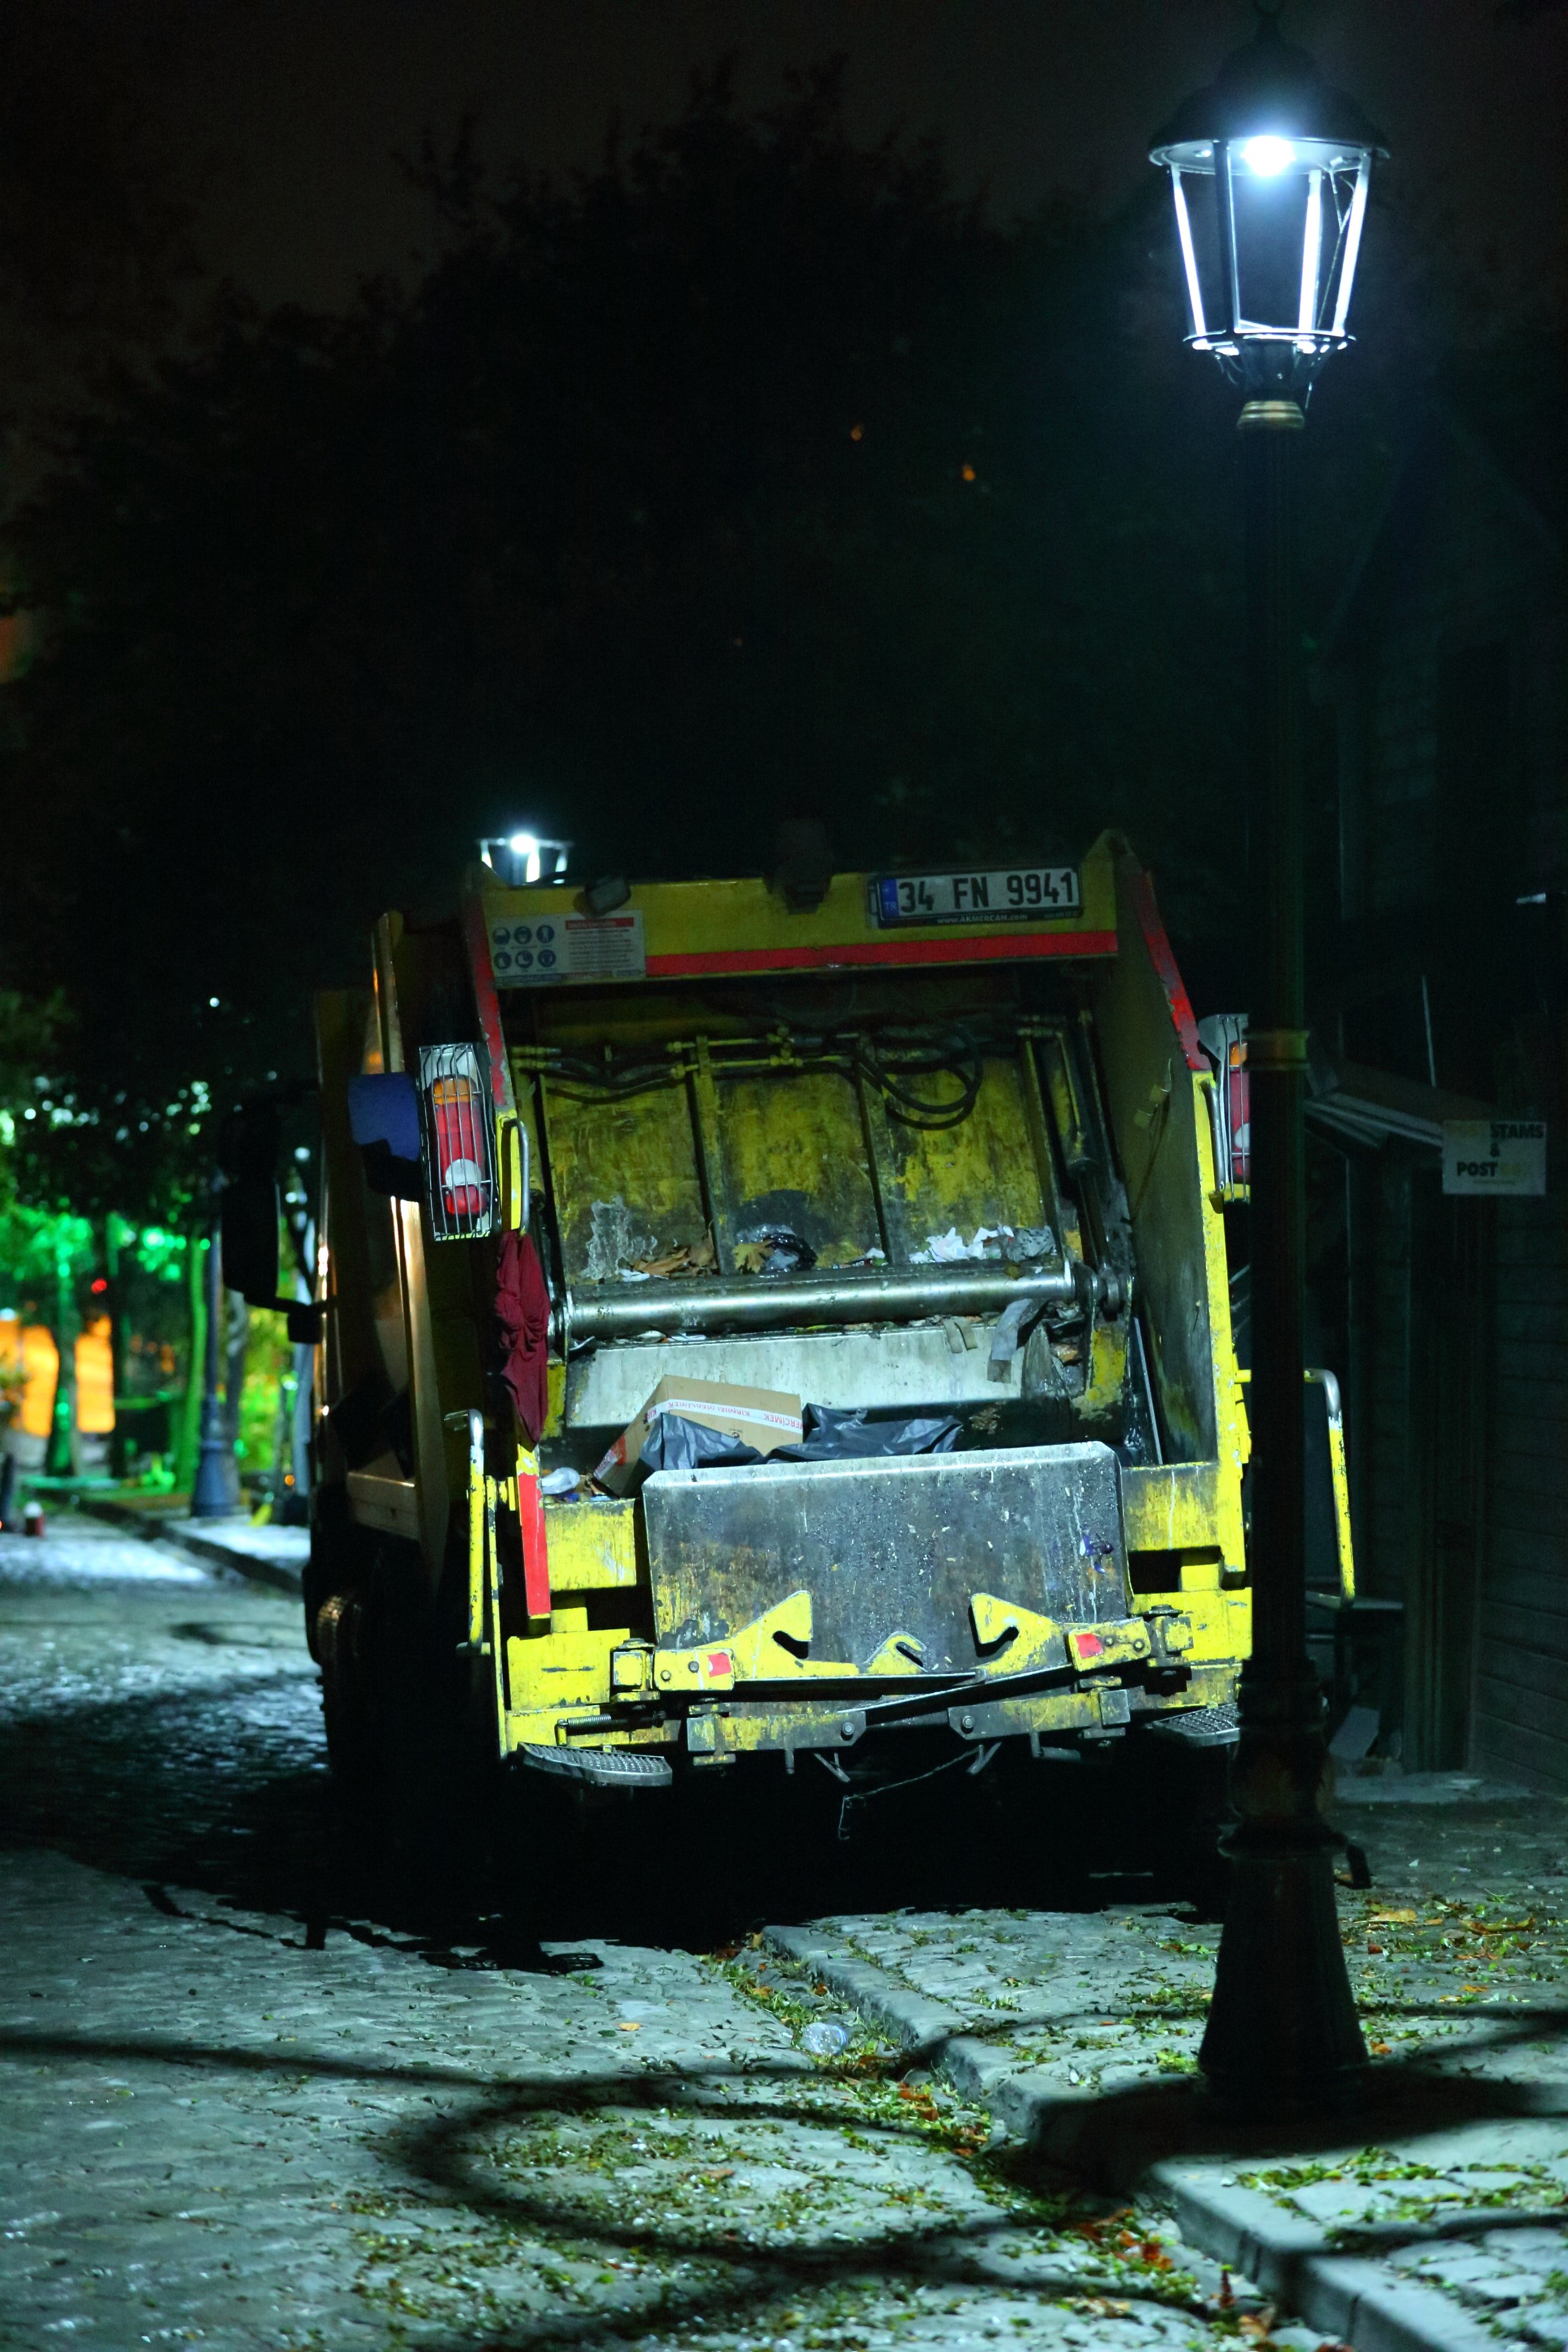 The man Jimmy first talked to turned out to be a garbage collector. | Source: Pexels